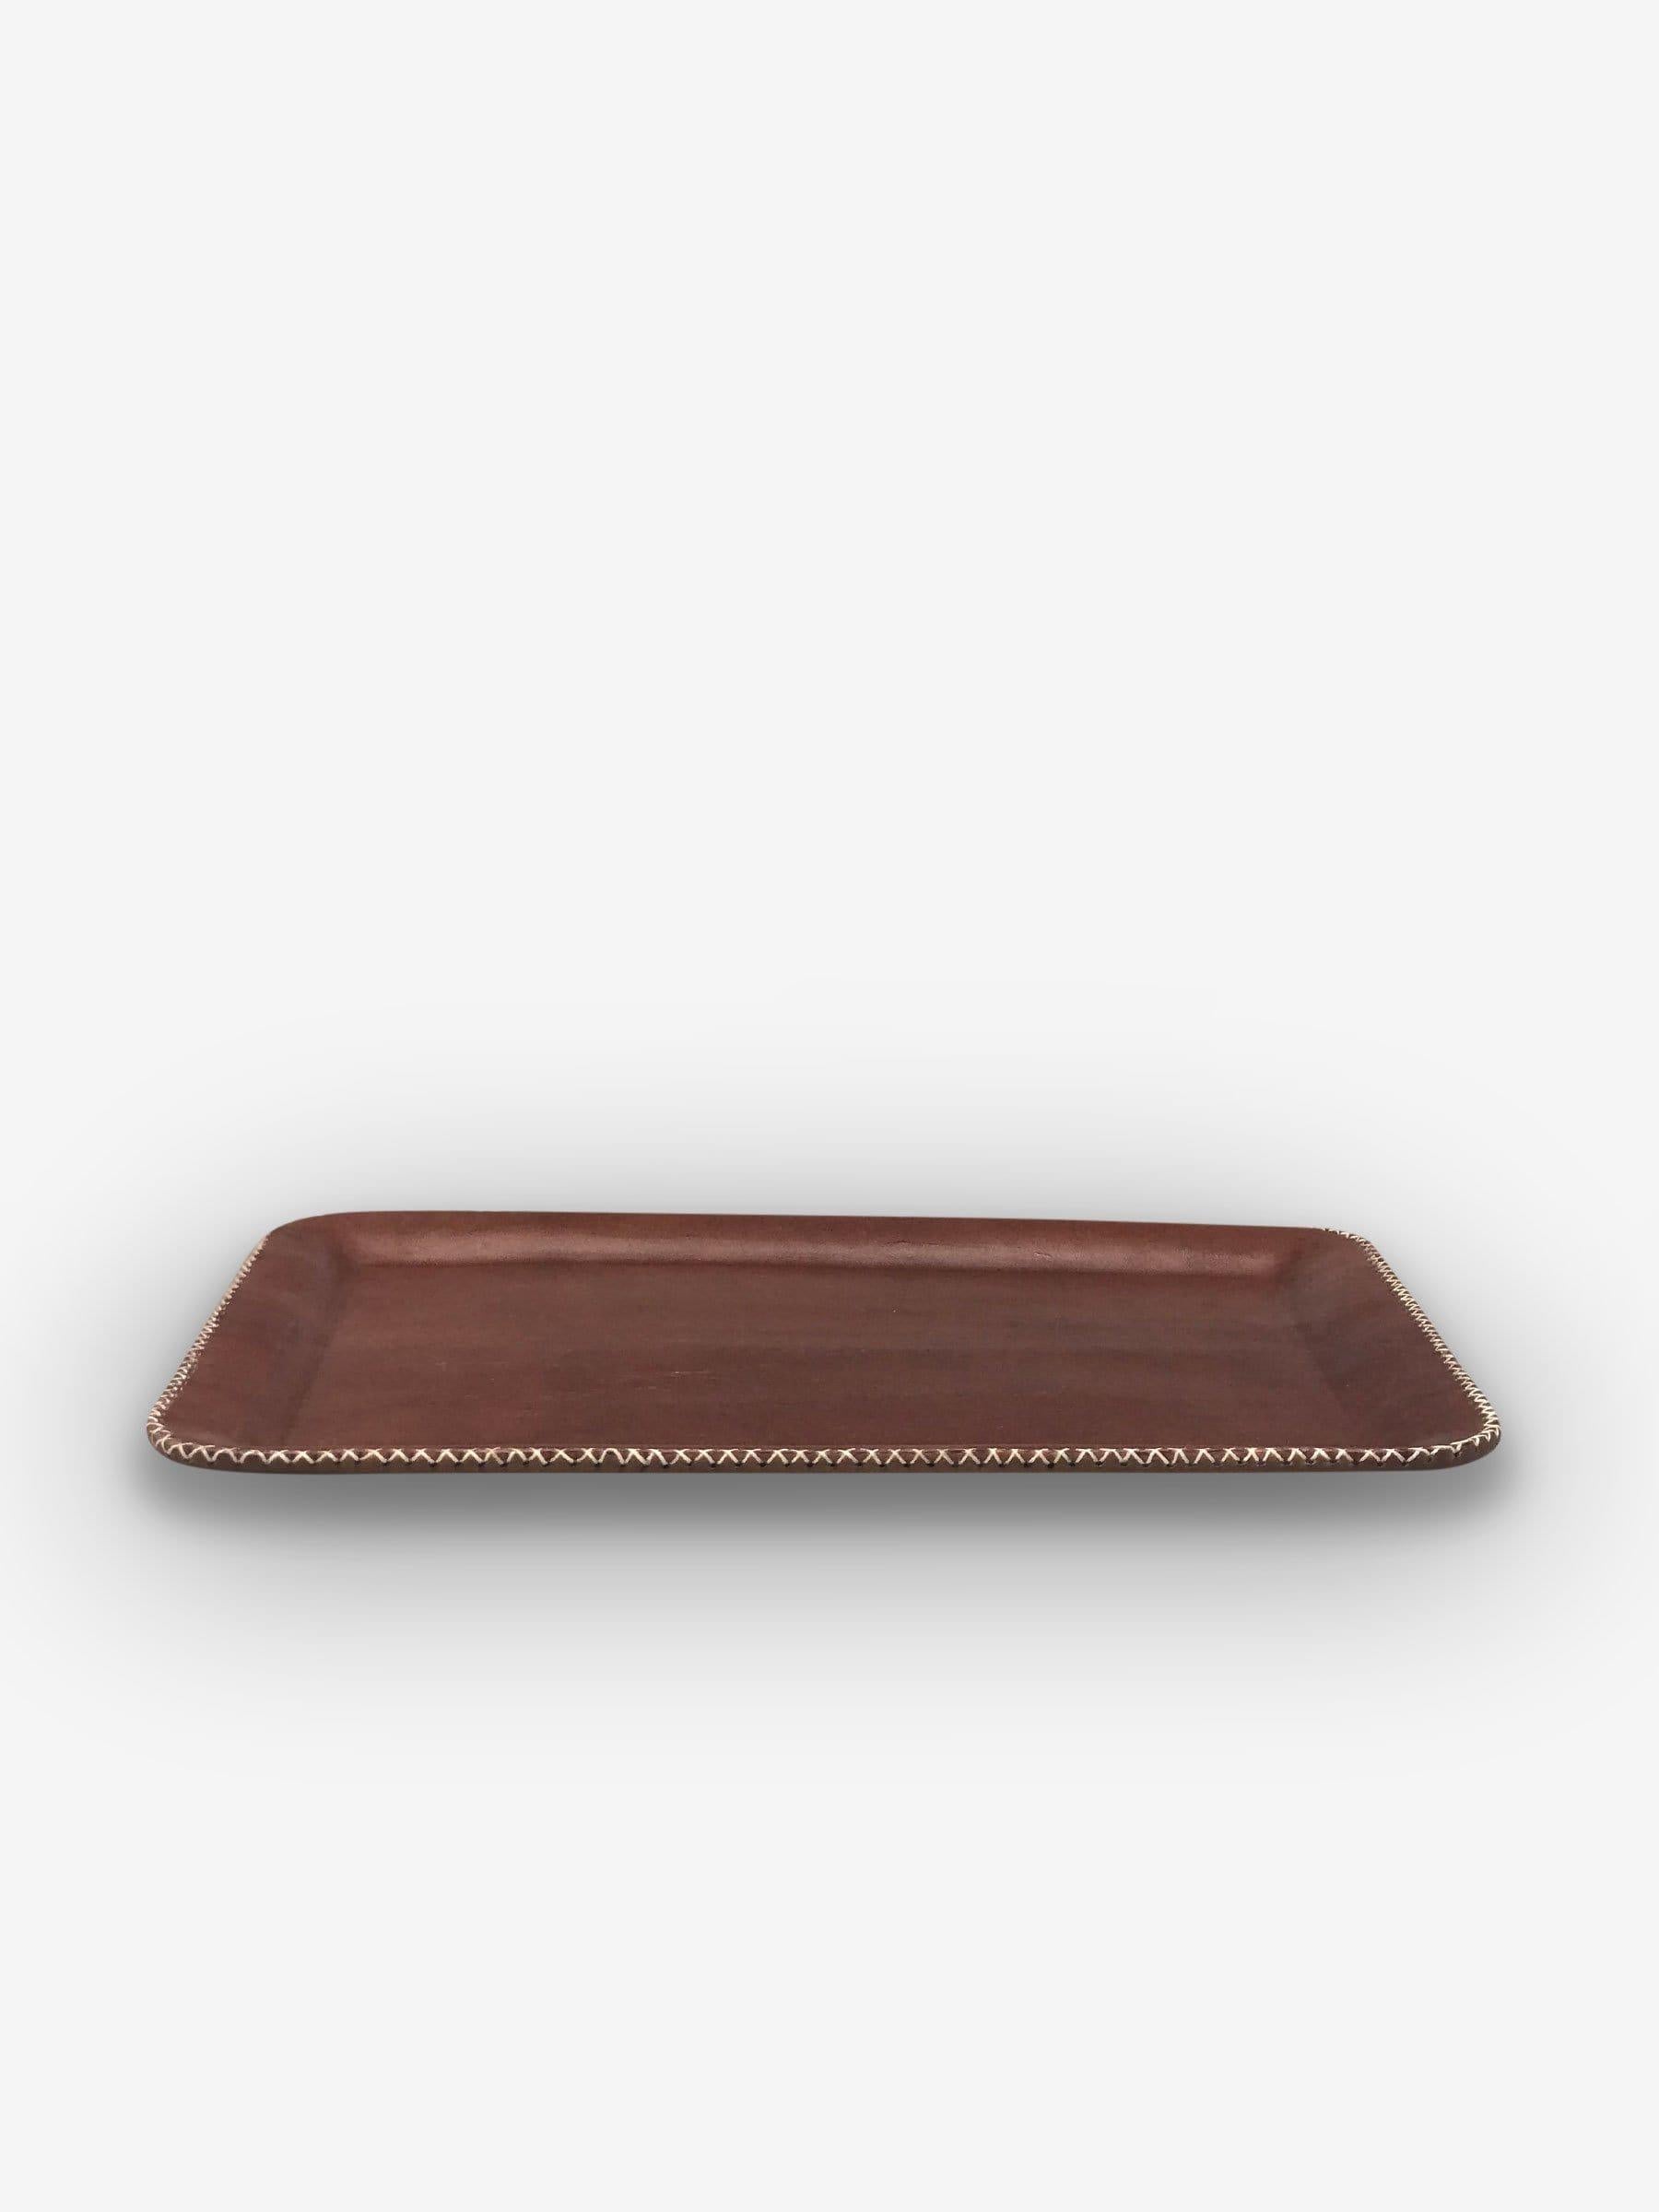 Louis Vuitton Leather Sundries Tray #SPONSORED #Vuitton #Louis #Leather